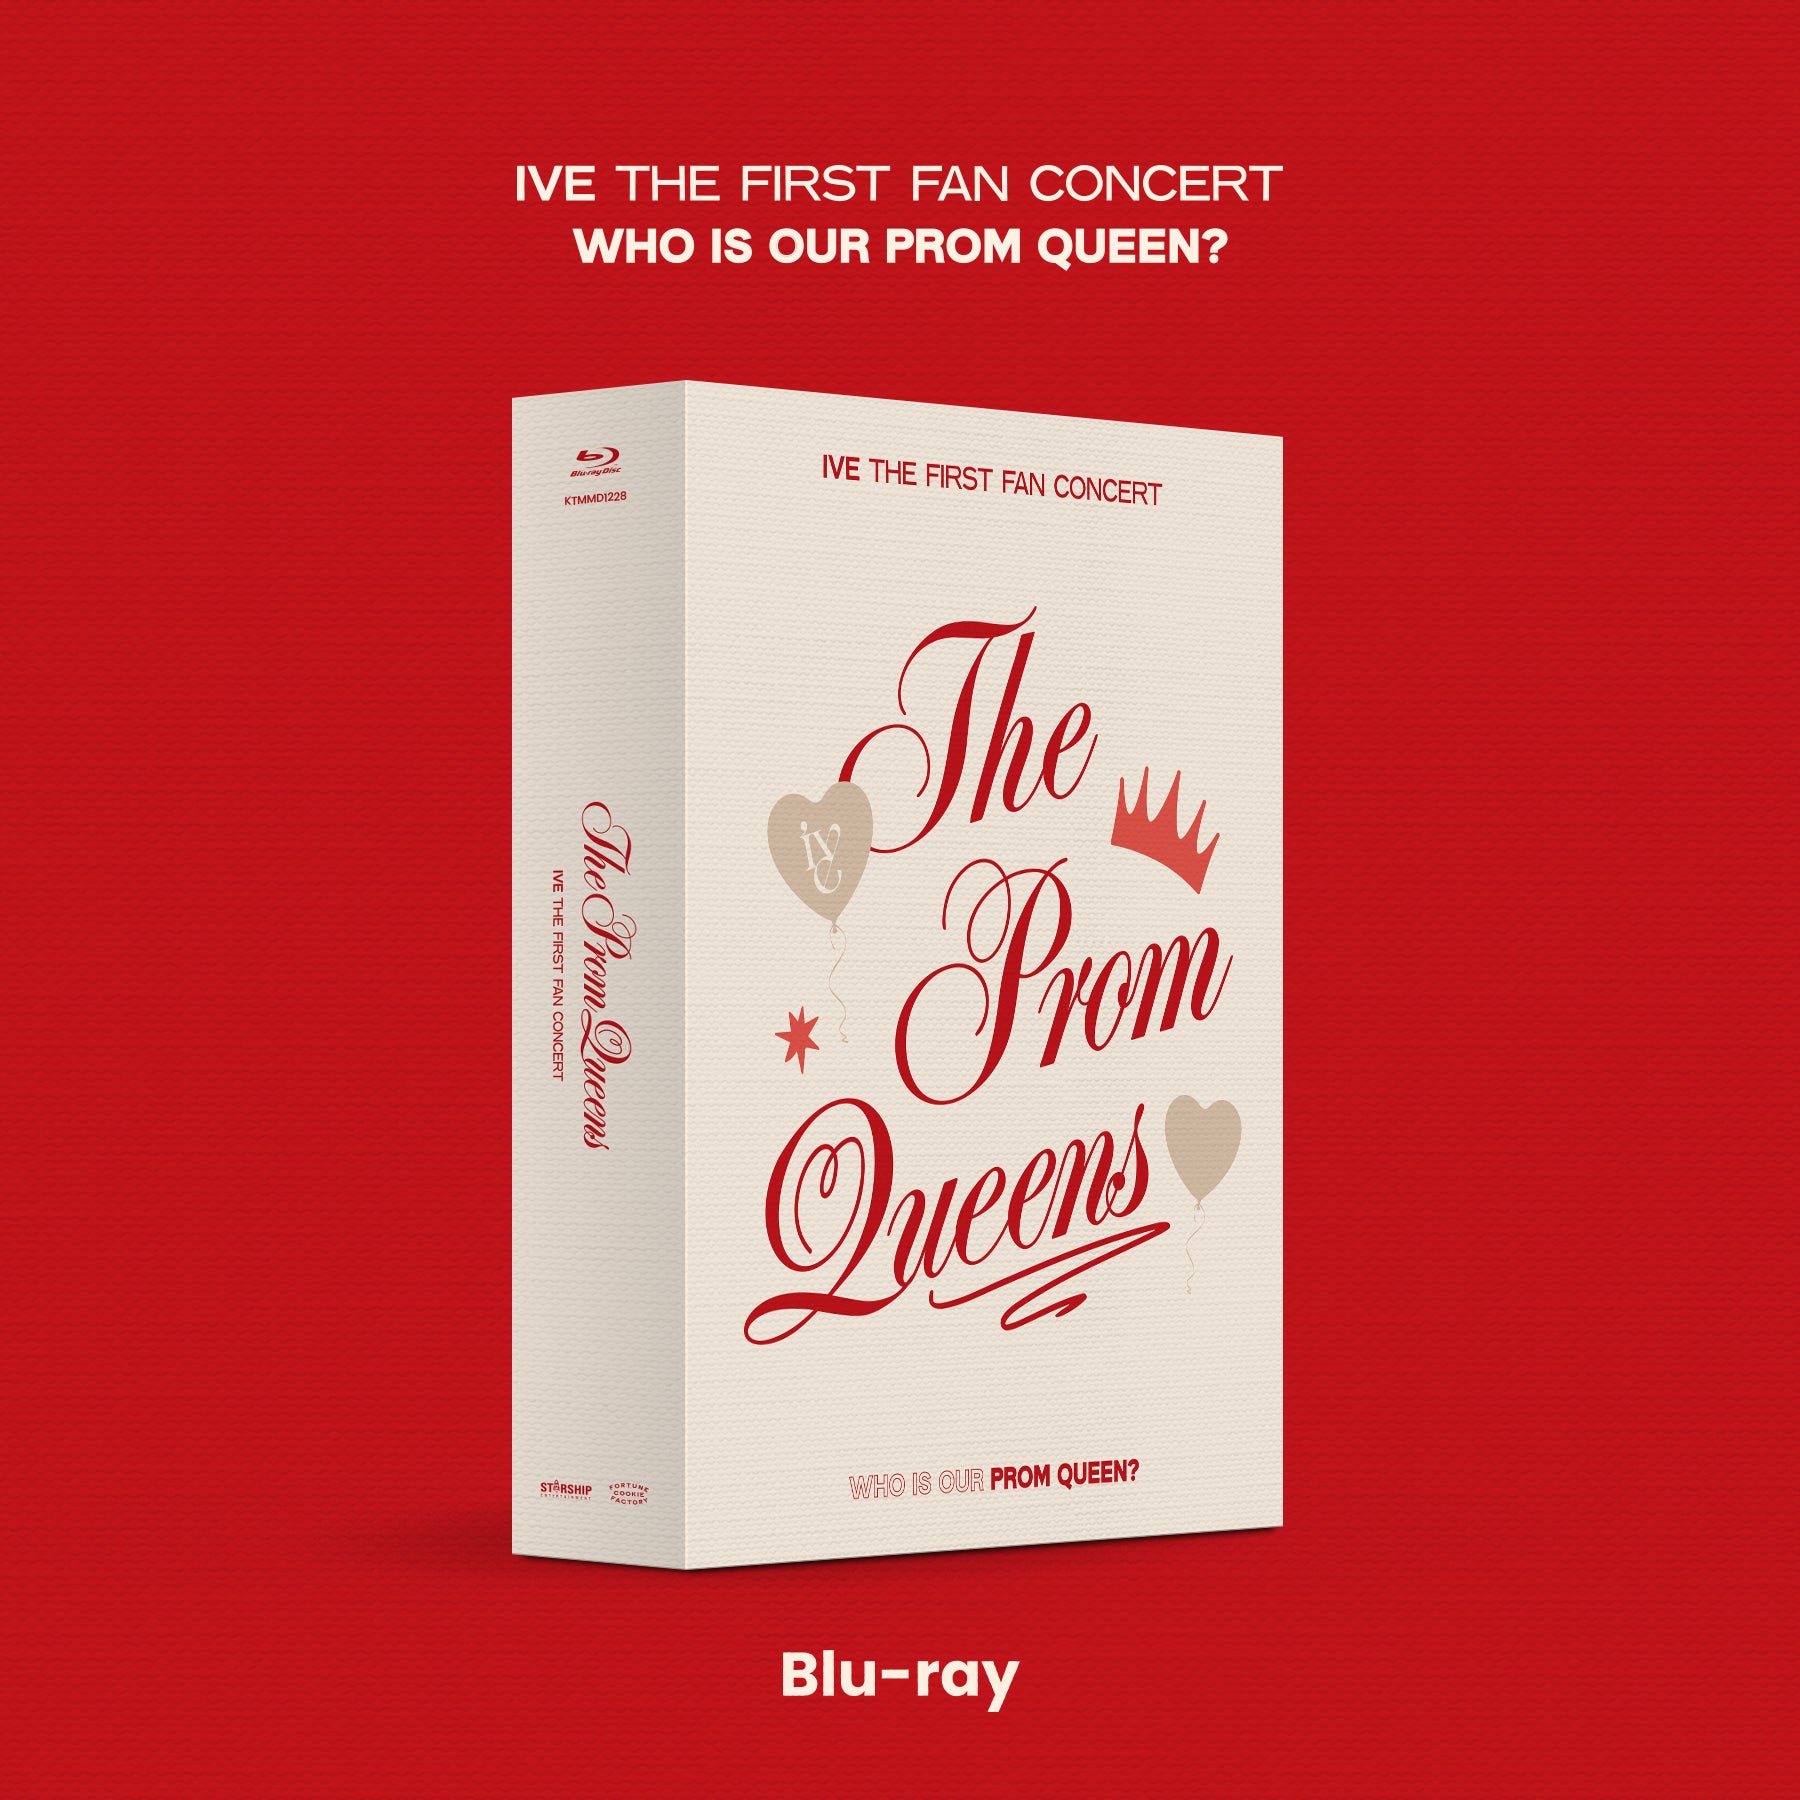 IVE - THE FIRST FAN CONCERT The Prom Queens Blu-ray